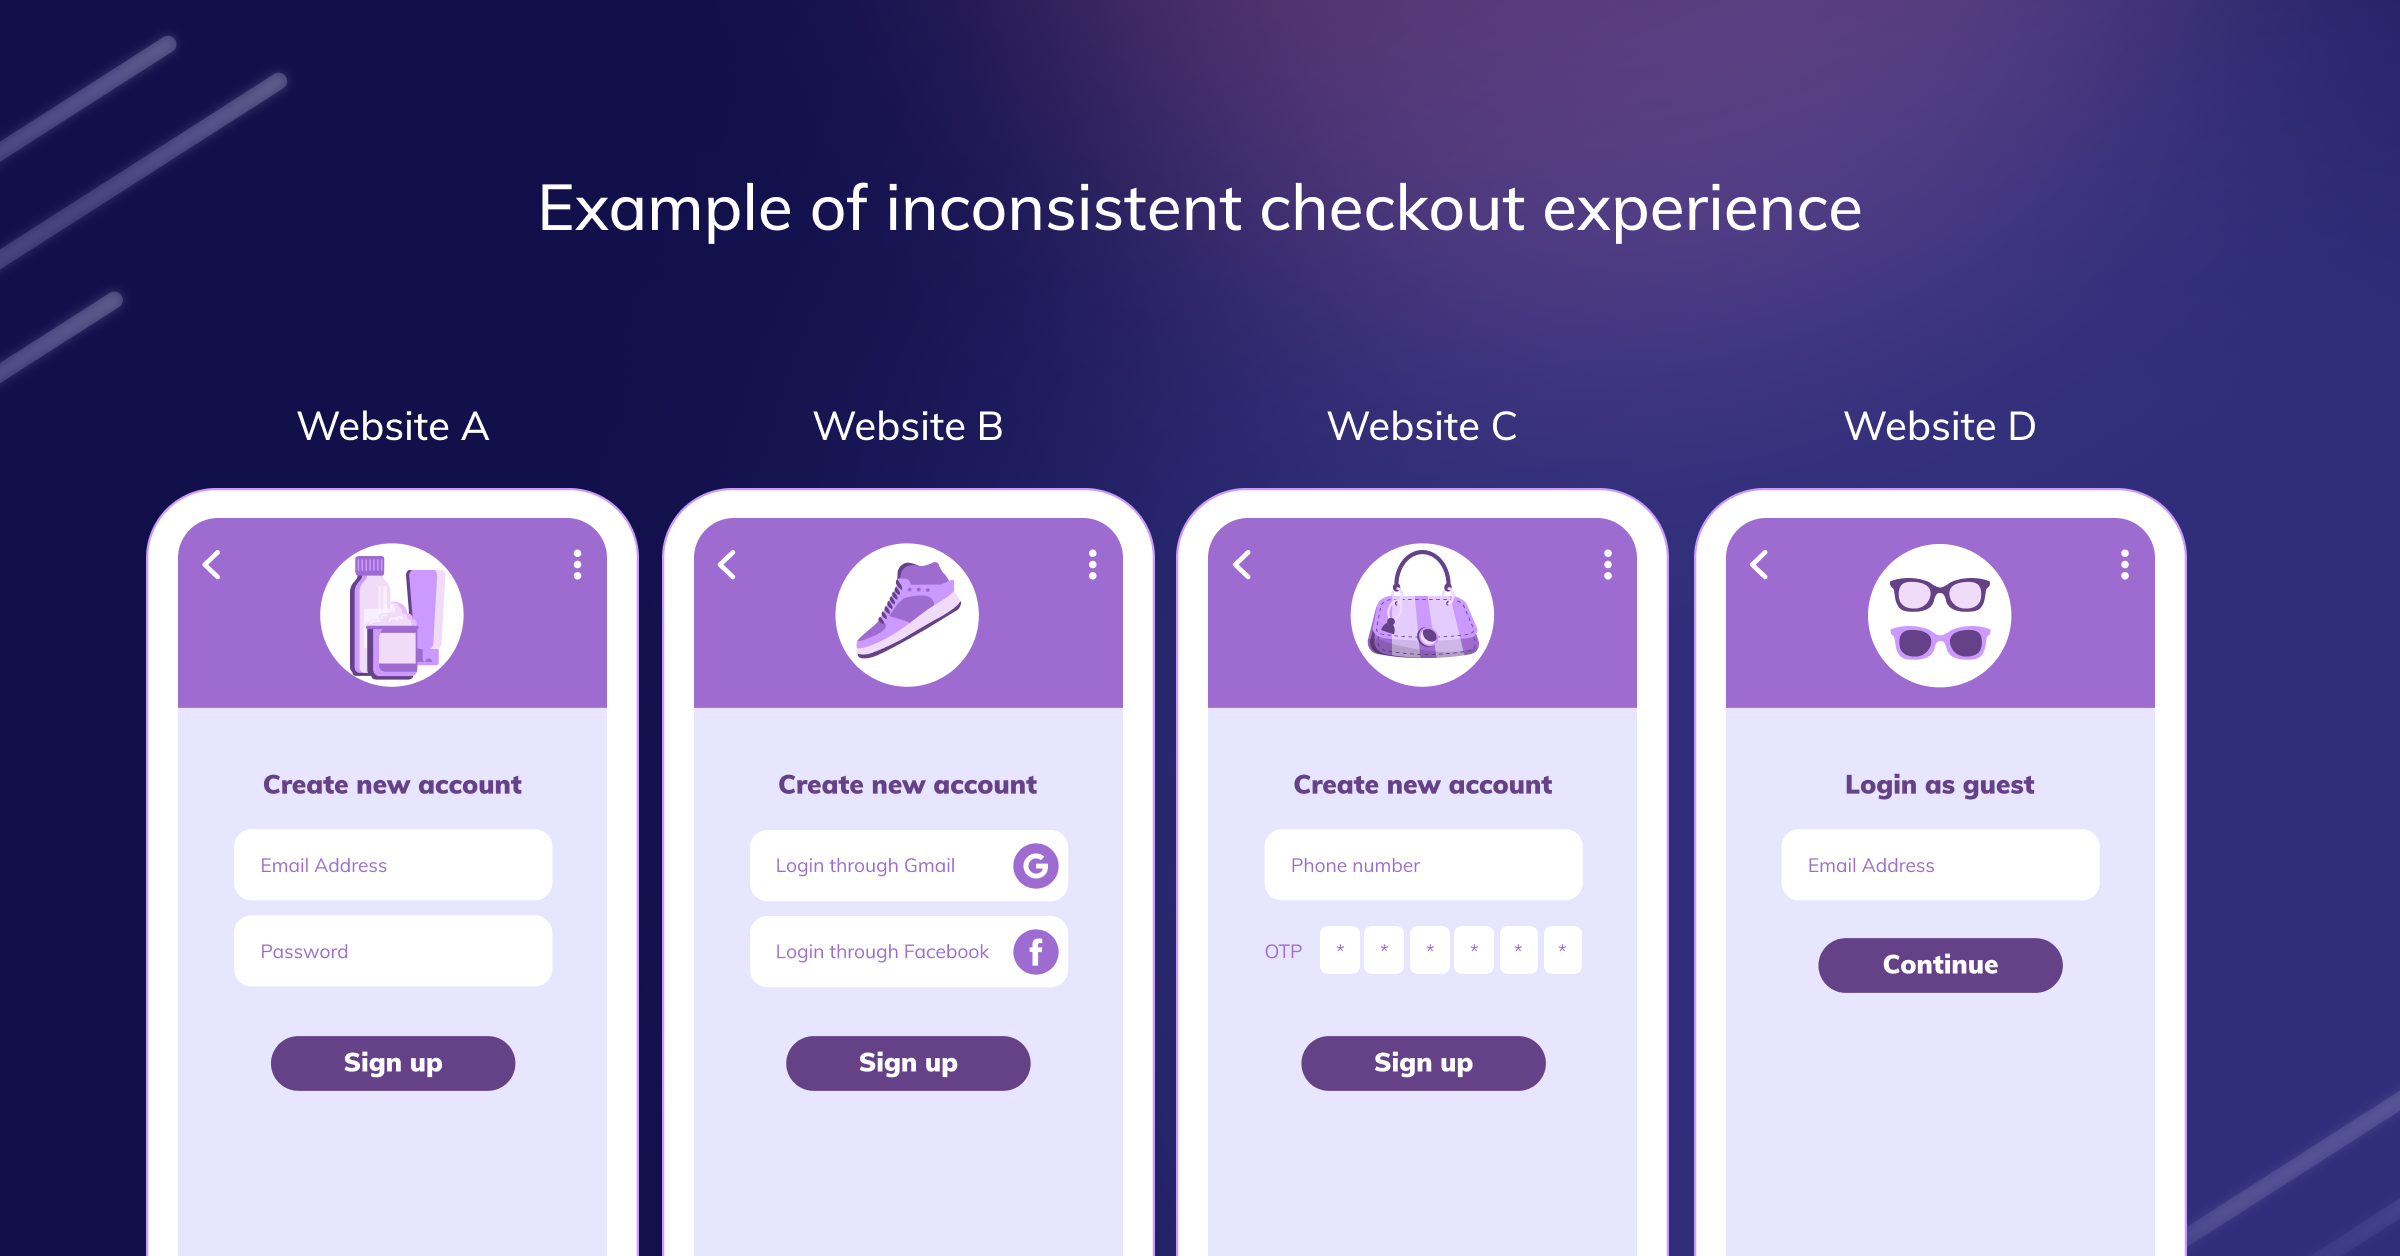 Inconsistency in Inconsistency in the checkout flow flow